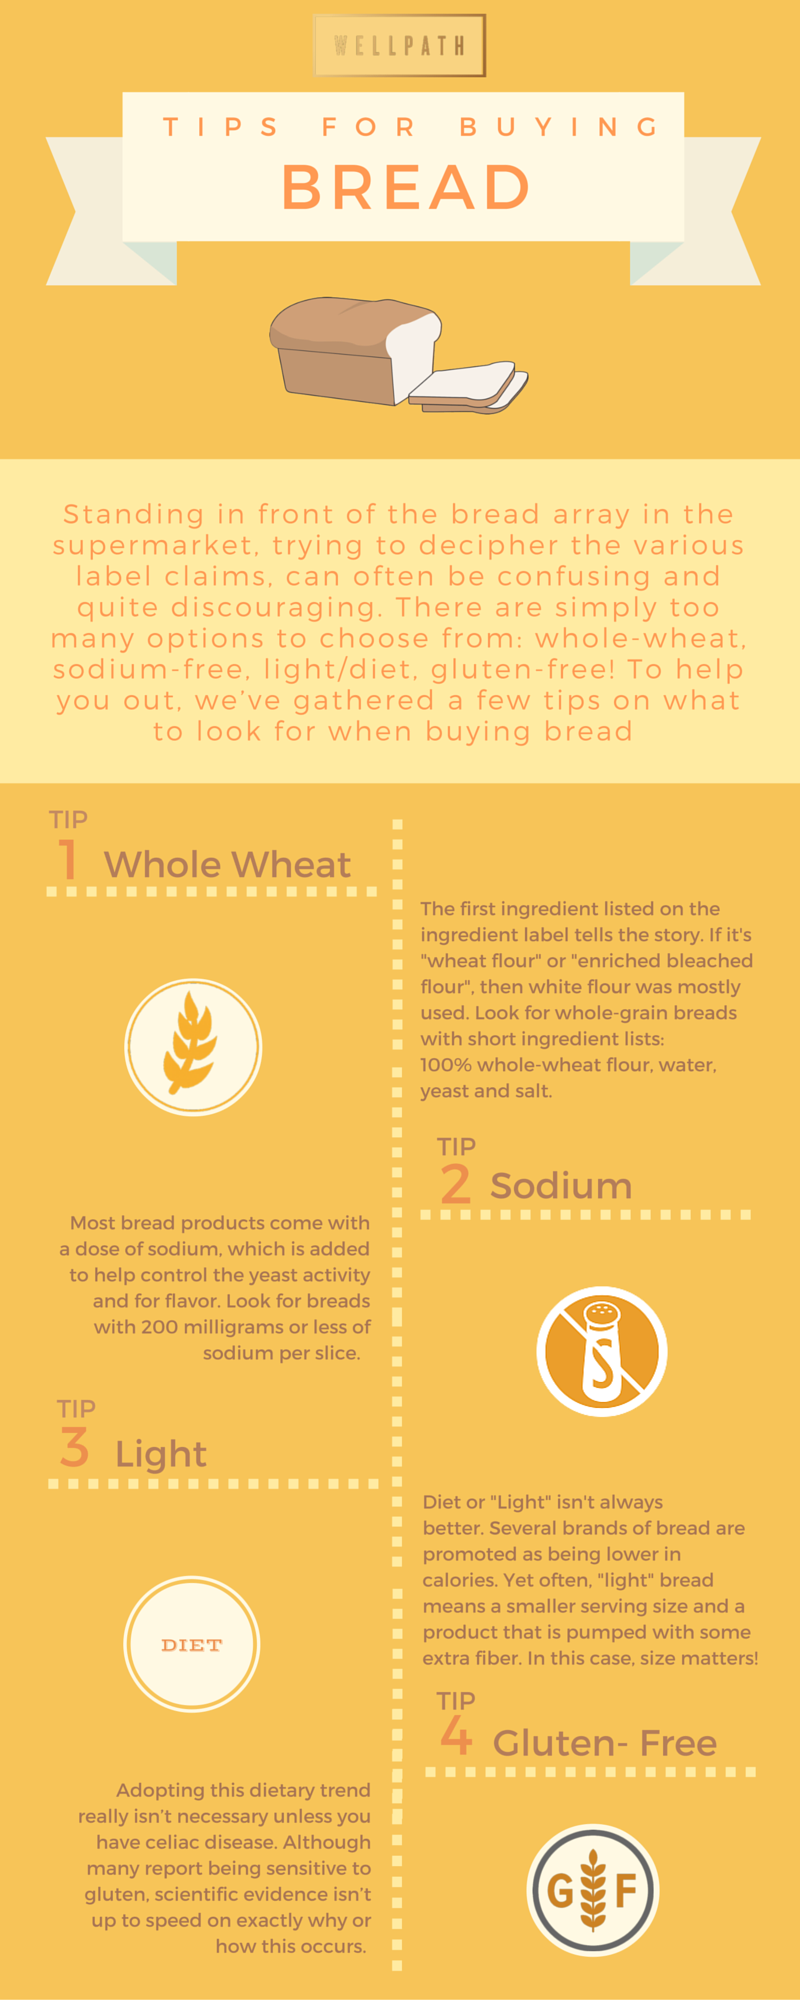 Tips for Buying Bread